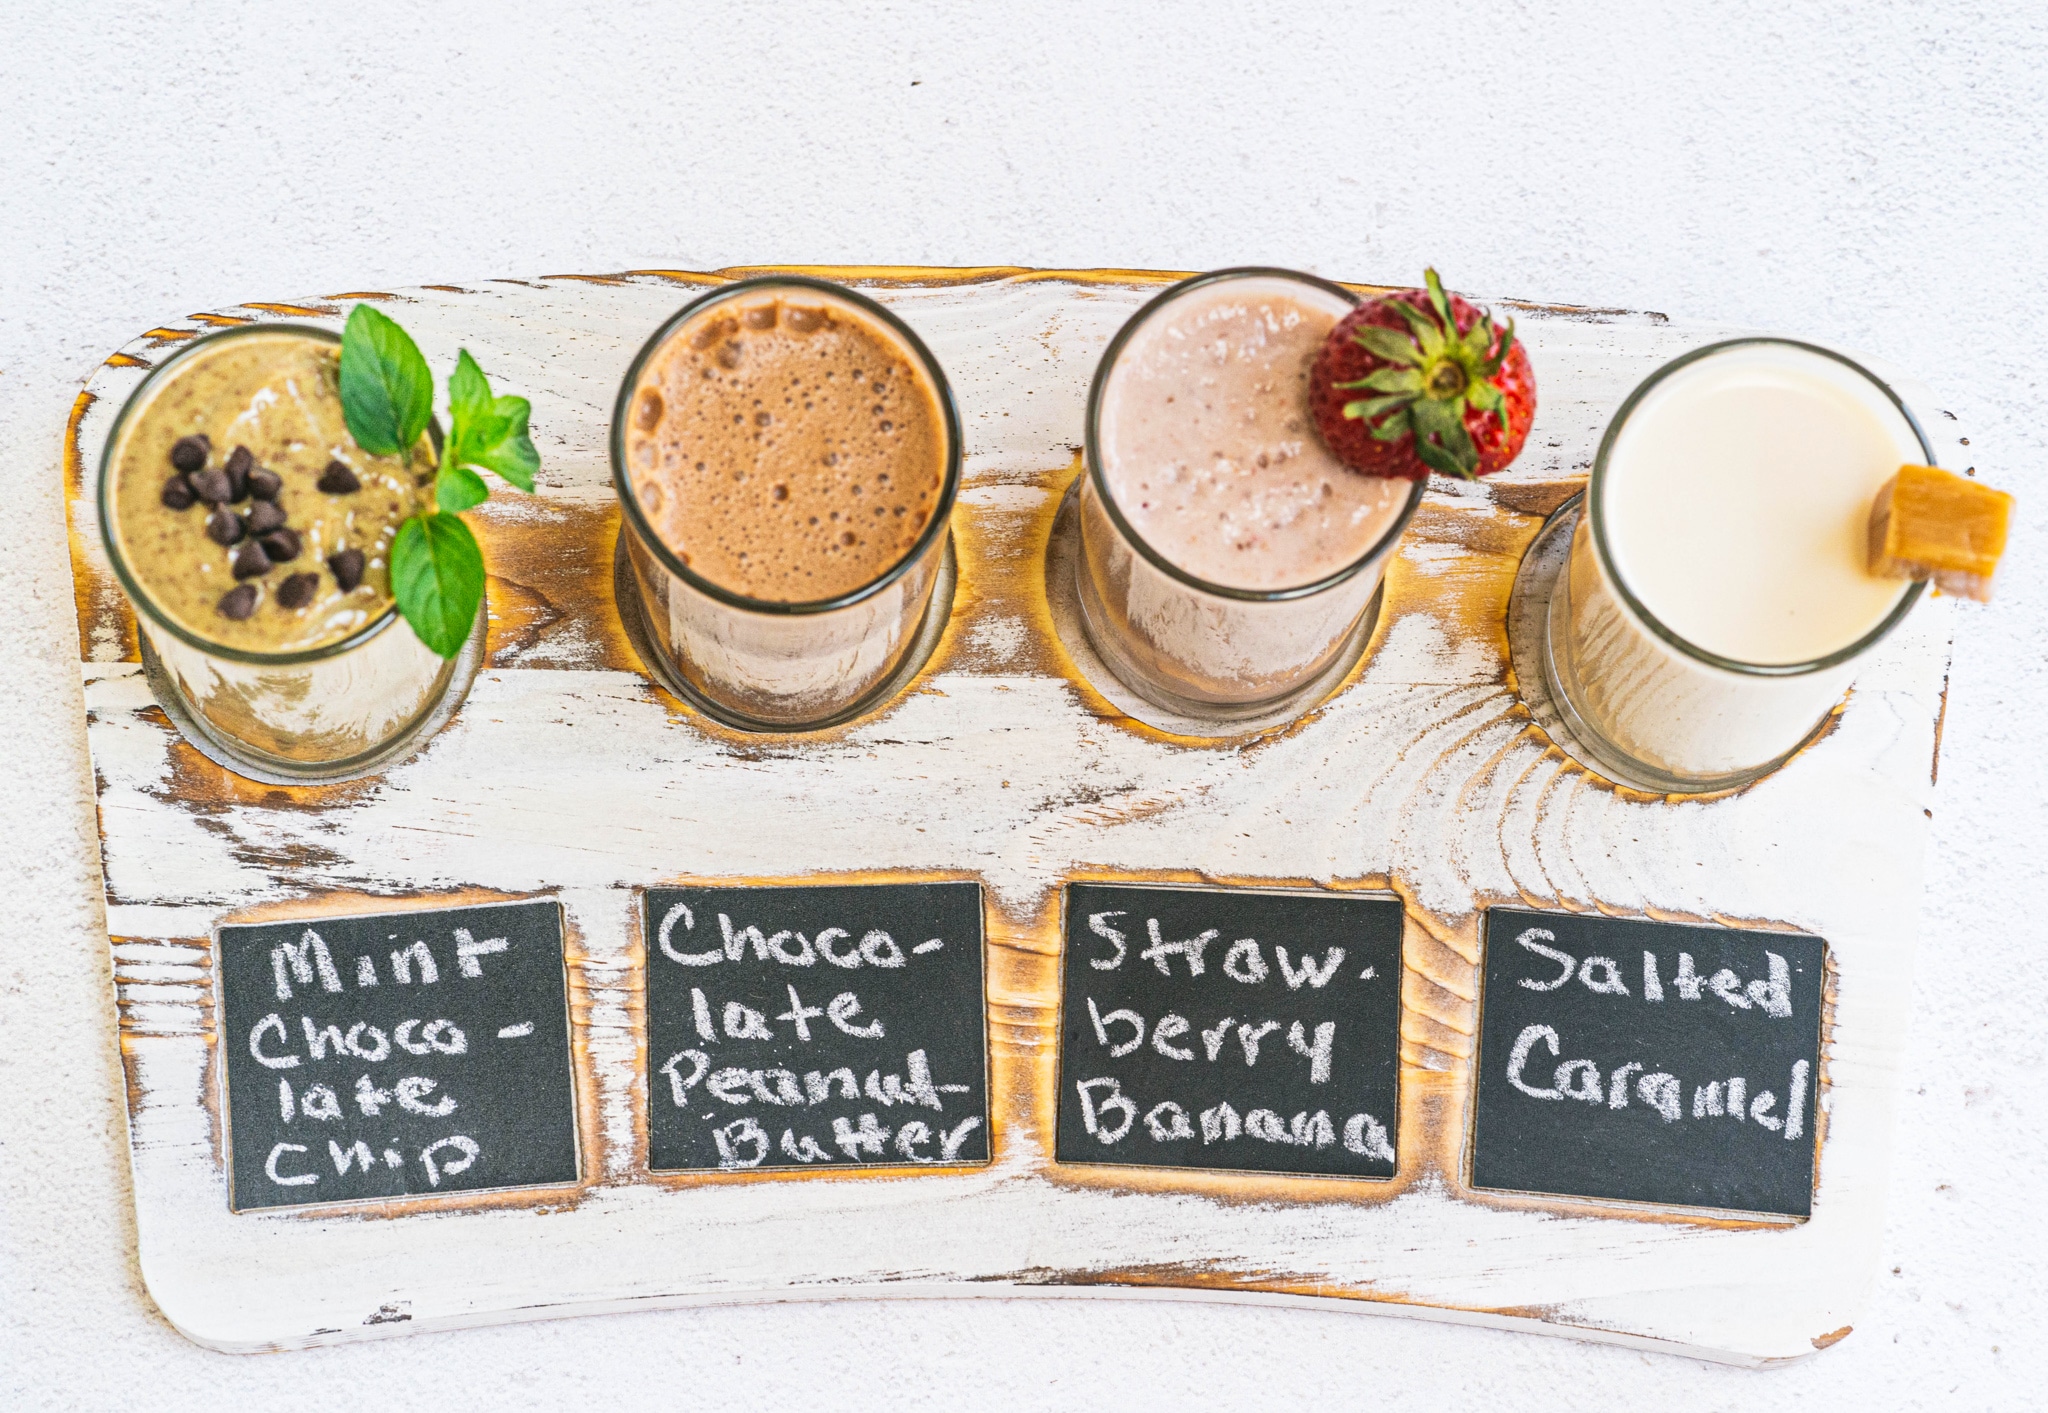 a wooden serving board with 4 glasses of different flavored milk on it. 